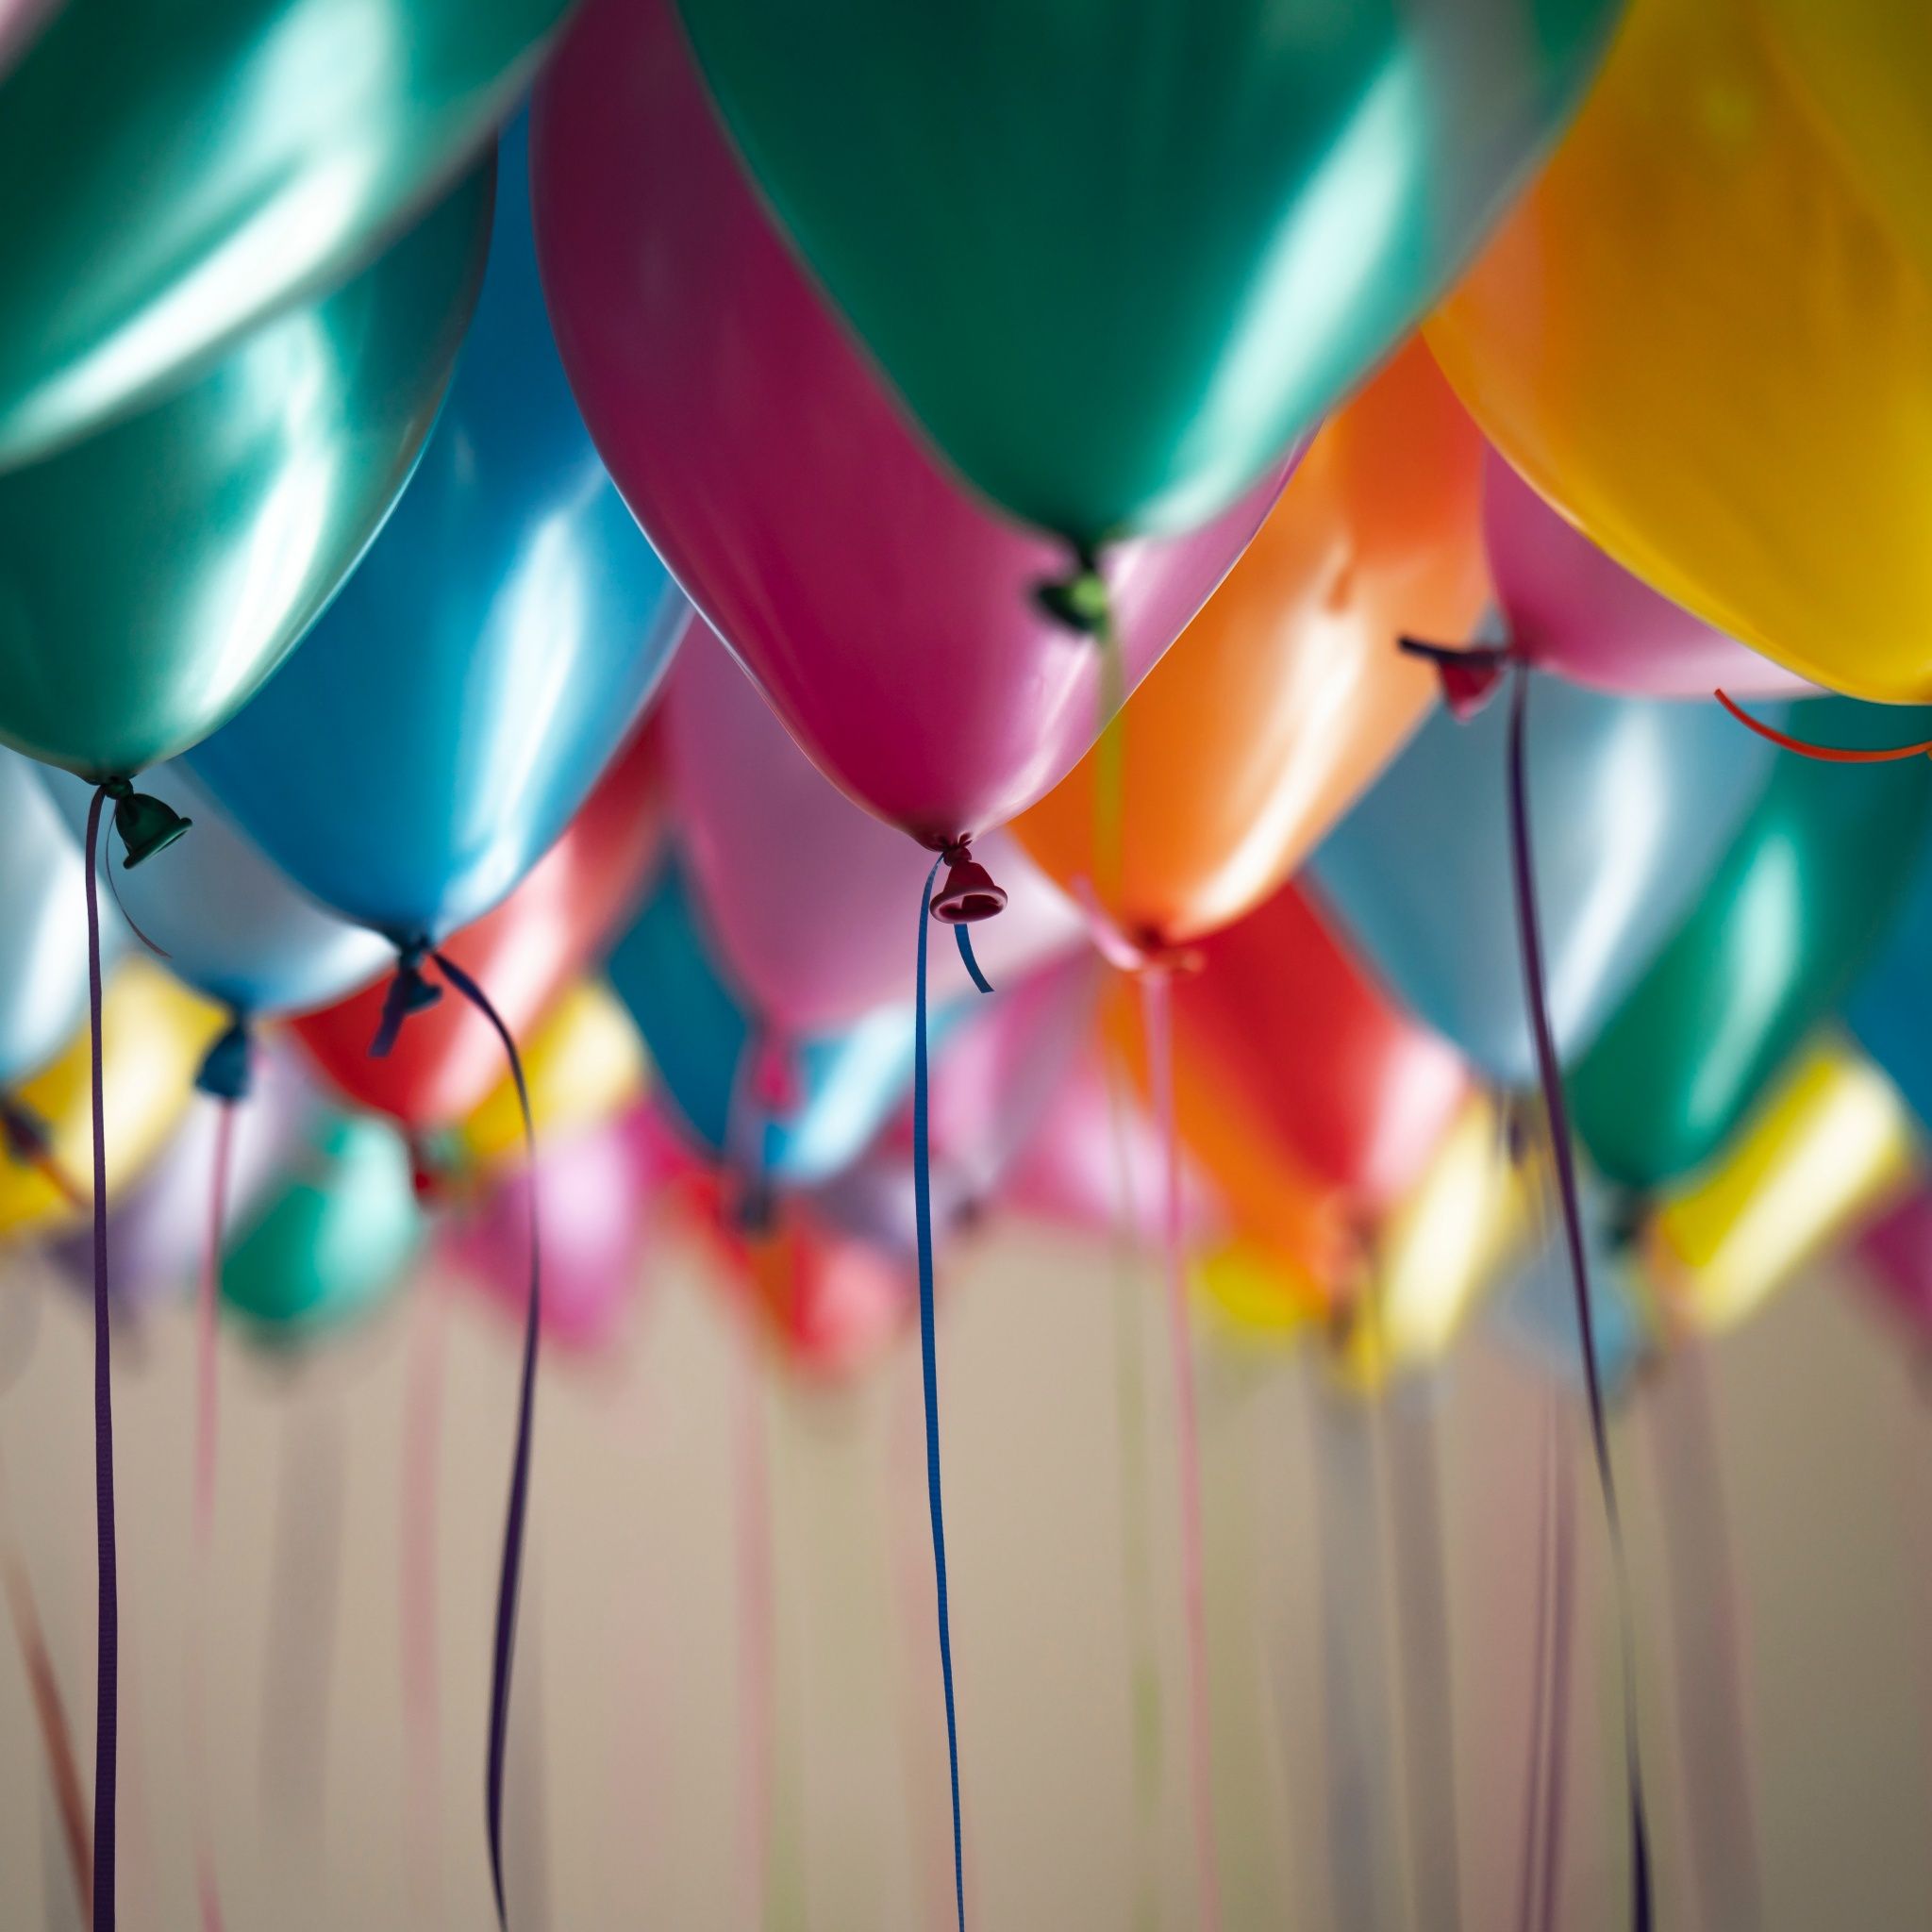 Colorful balloons Wallpaper 4K, Birthday, Decoration, Party, 5K